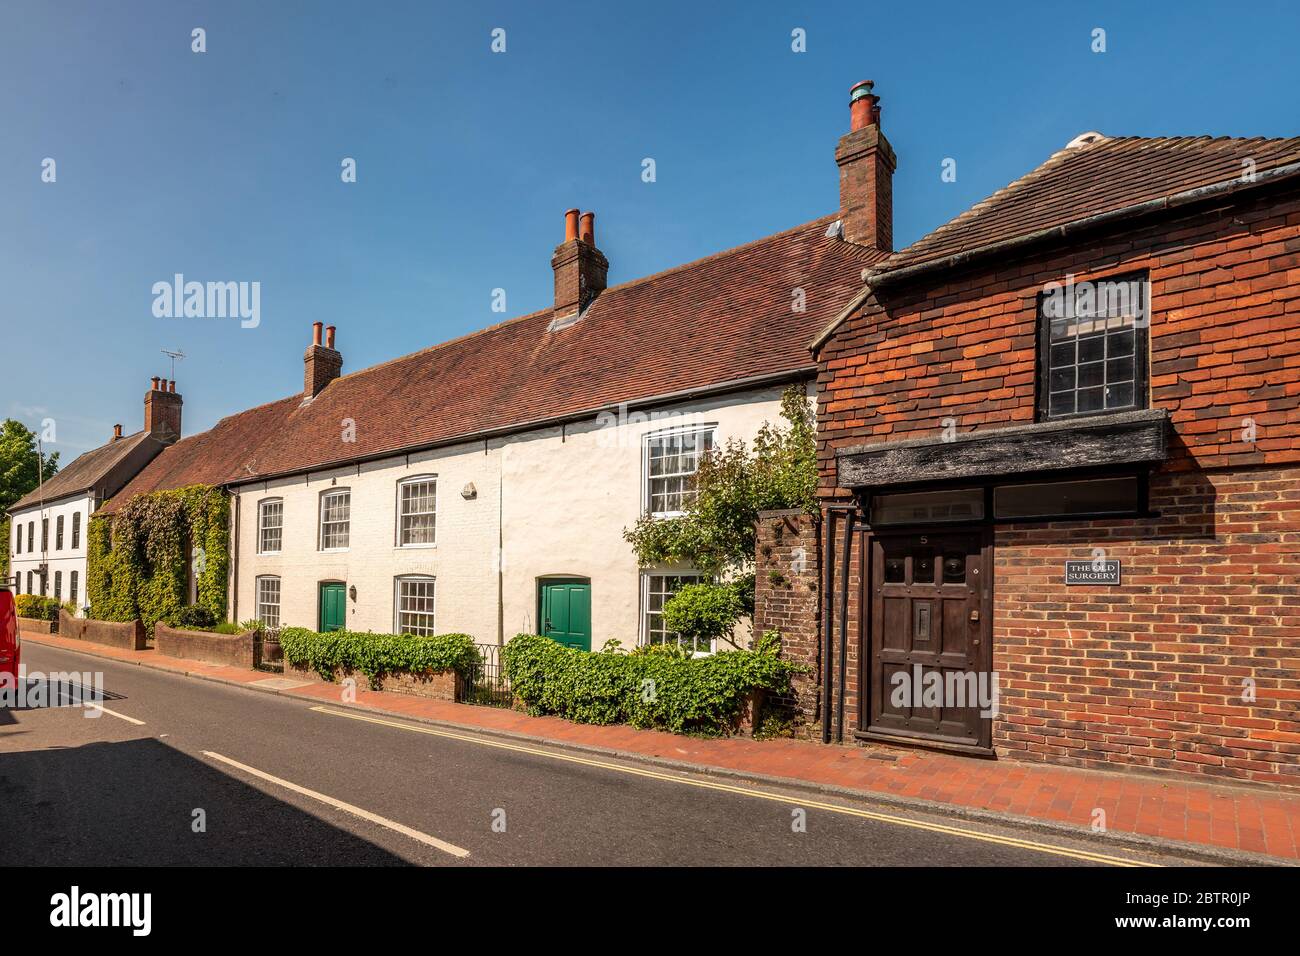 Ditchling UK 21st May 2020: In and around the village of Ditchling Stock Photo